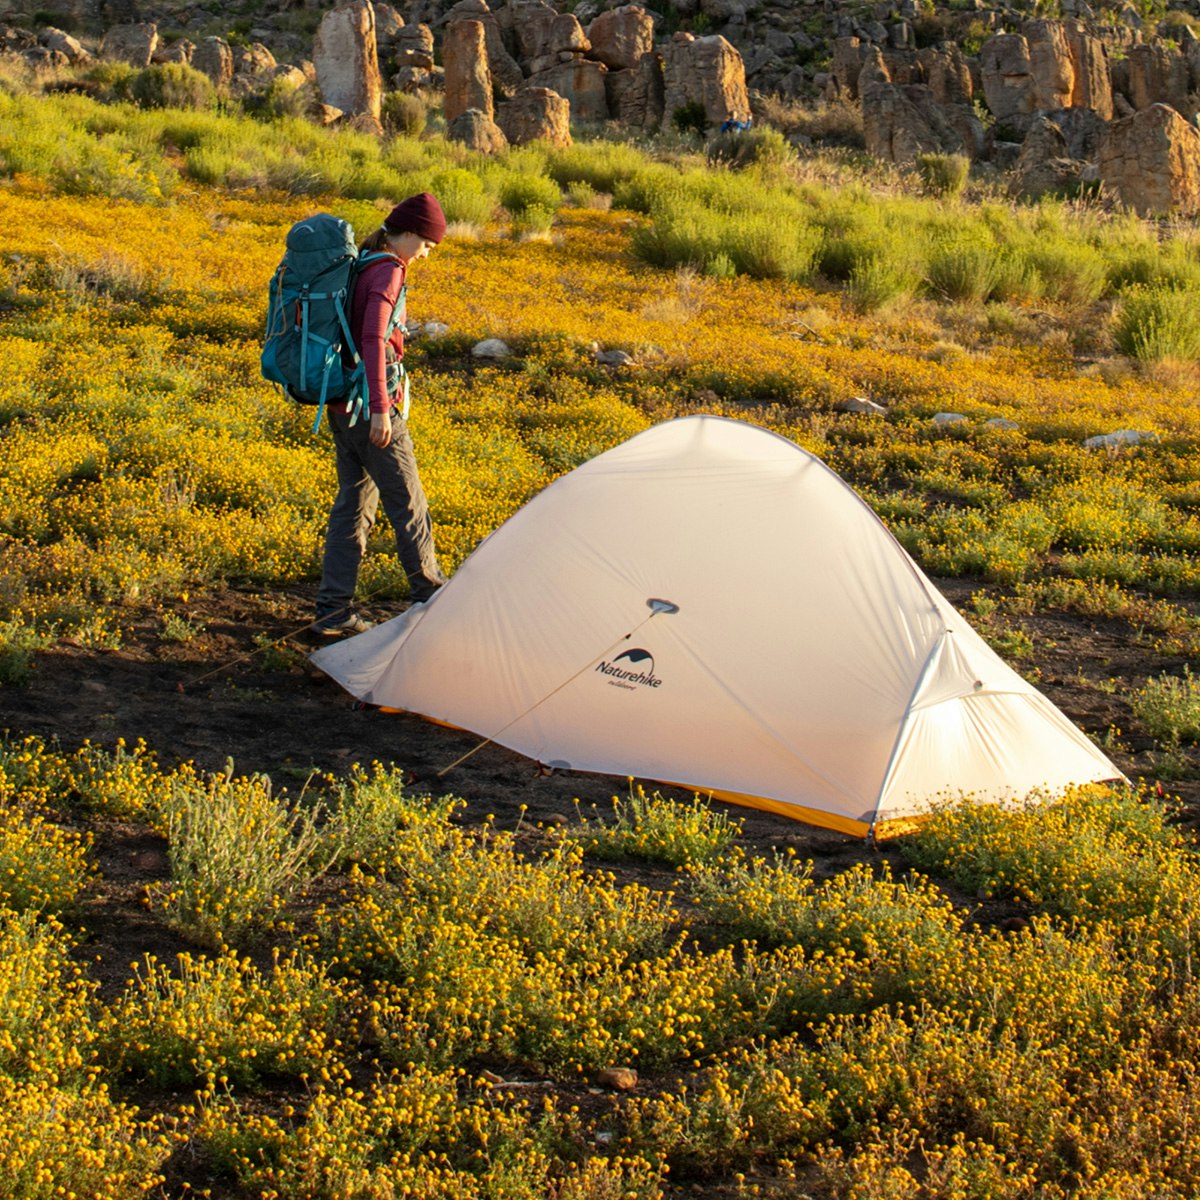 Cloud Up 2 10D Ultralight two-person tent (930 grams)